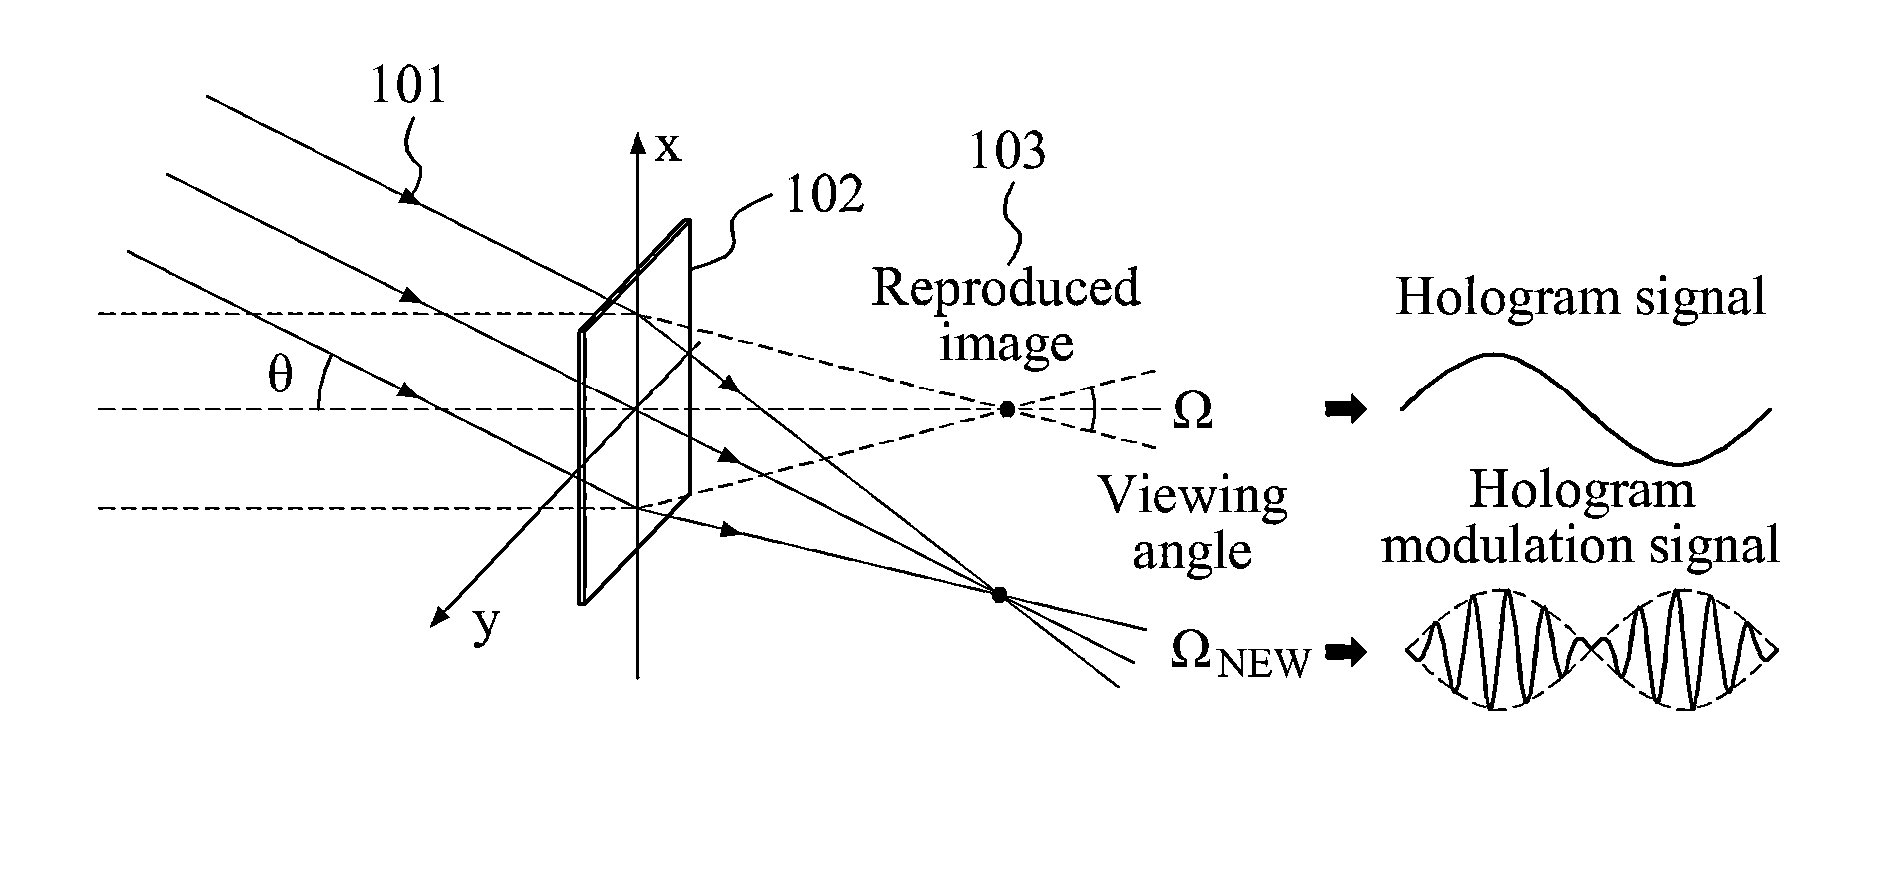 Wide-viewing angle holographic display apparatus